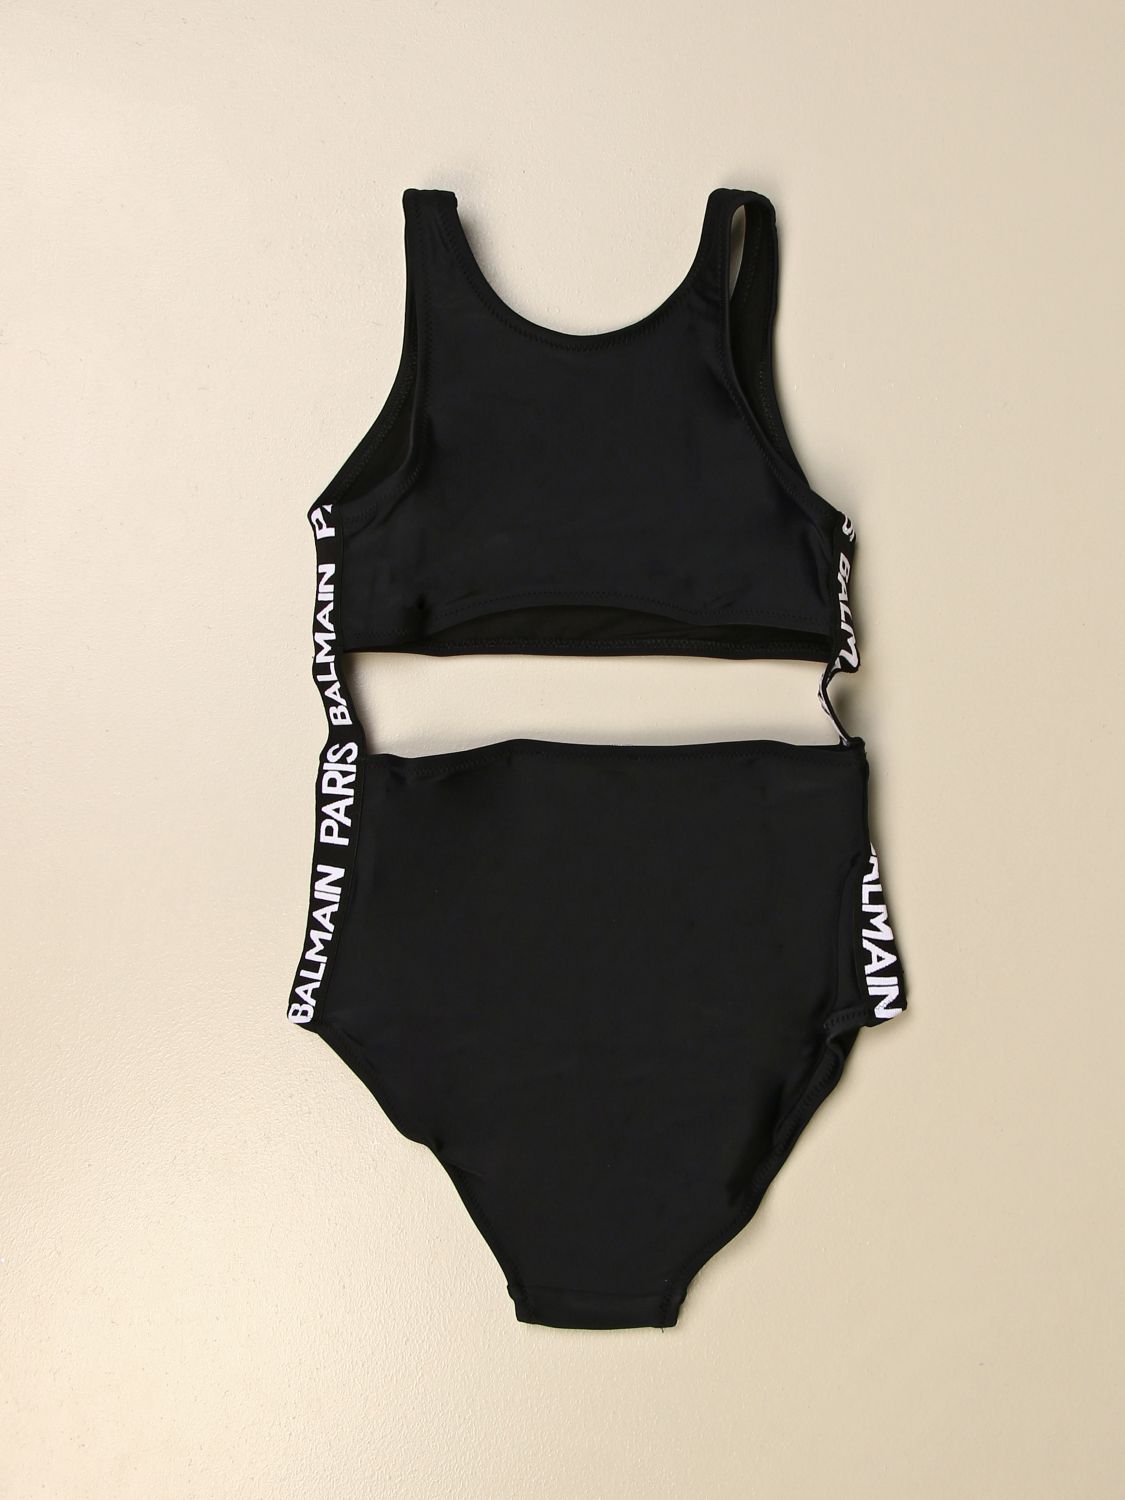 BALMAIN: swimsuit with logoed bands | Swimsuit Balmain Kids Black | Swimsuit Balmain 6M0029 MX400 GIGLIO.COM